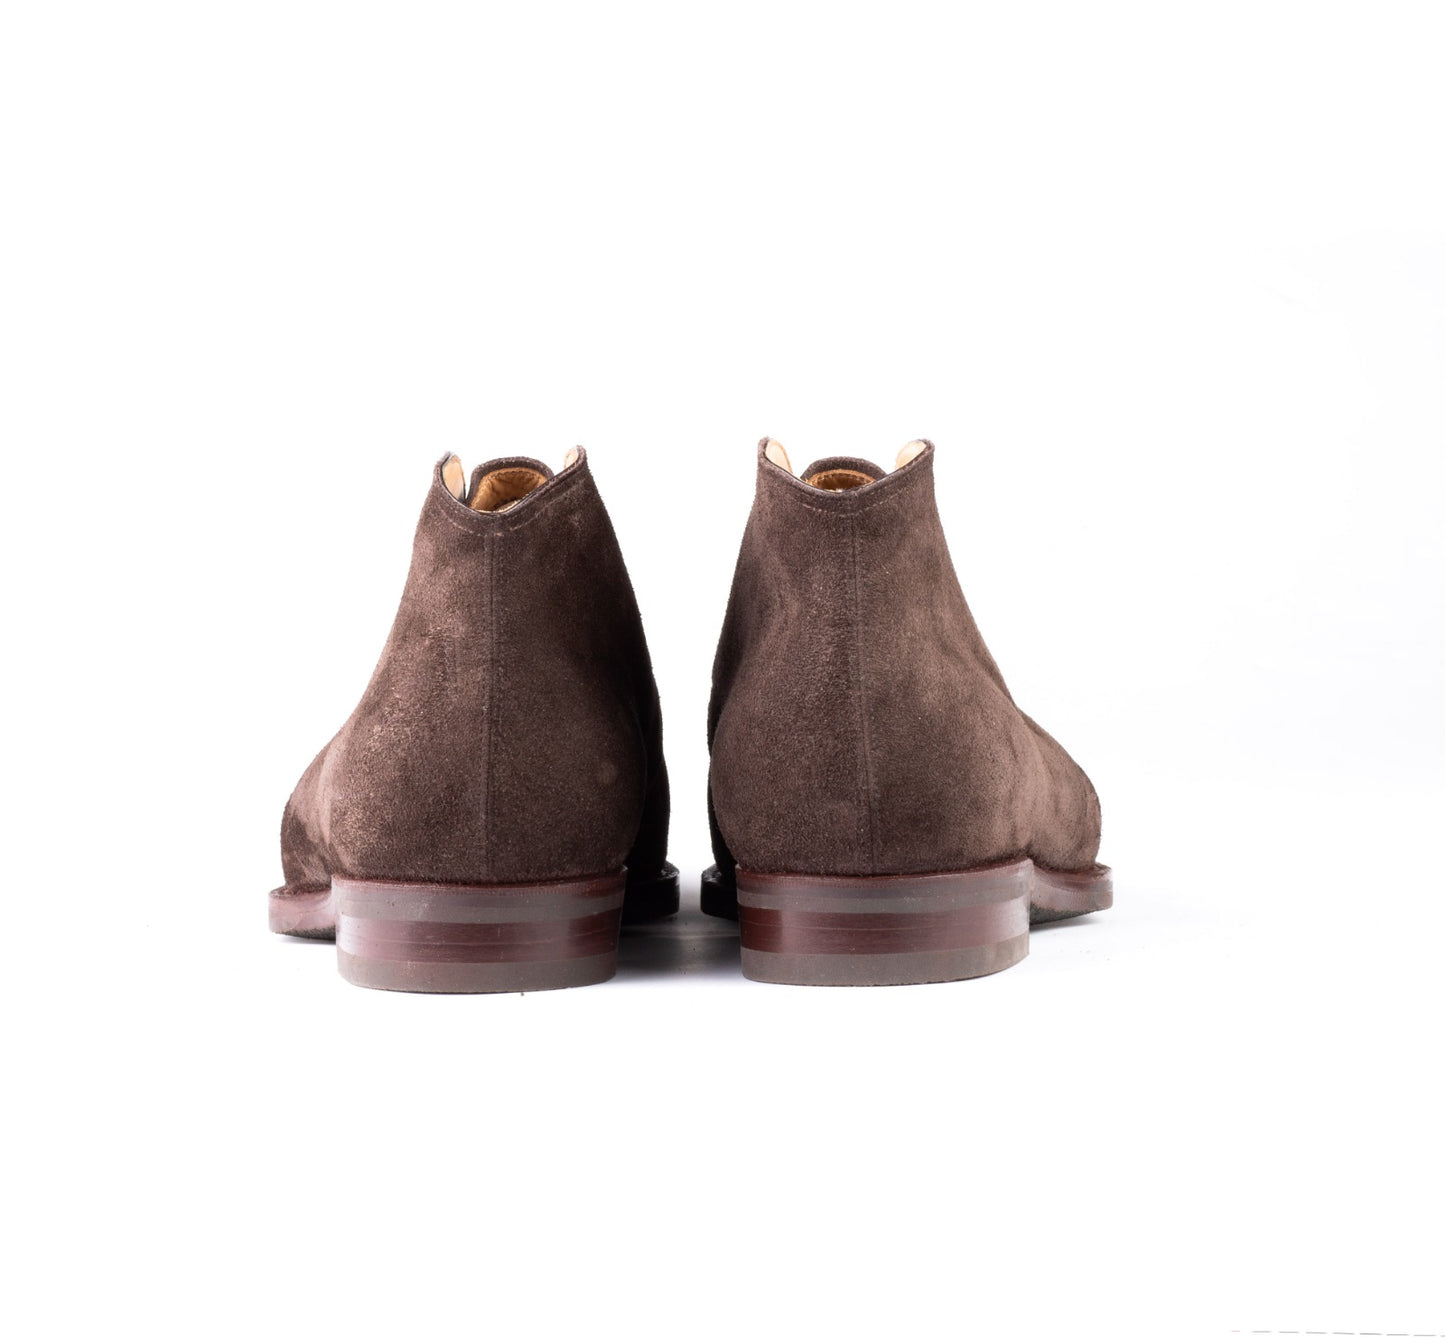 Chukka boots with two eylets and curved topline